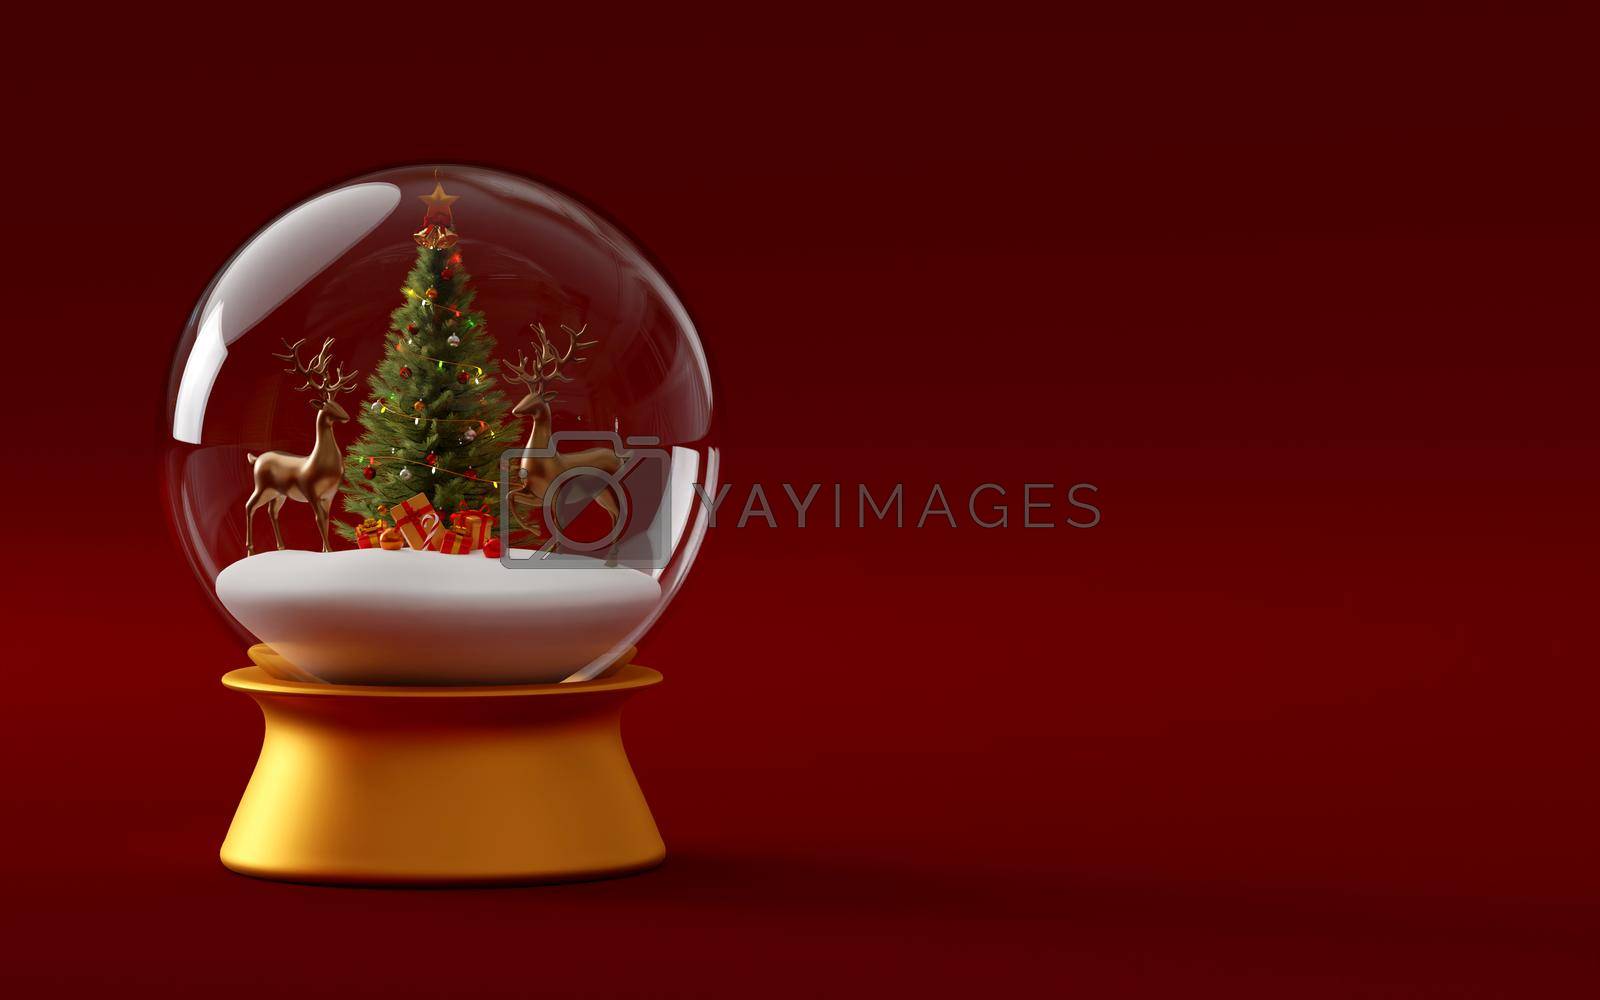 Royalty free image of Reindeer with Christmas tree in snow globe, 3d illustration by nutzchotwarut